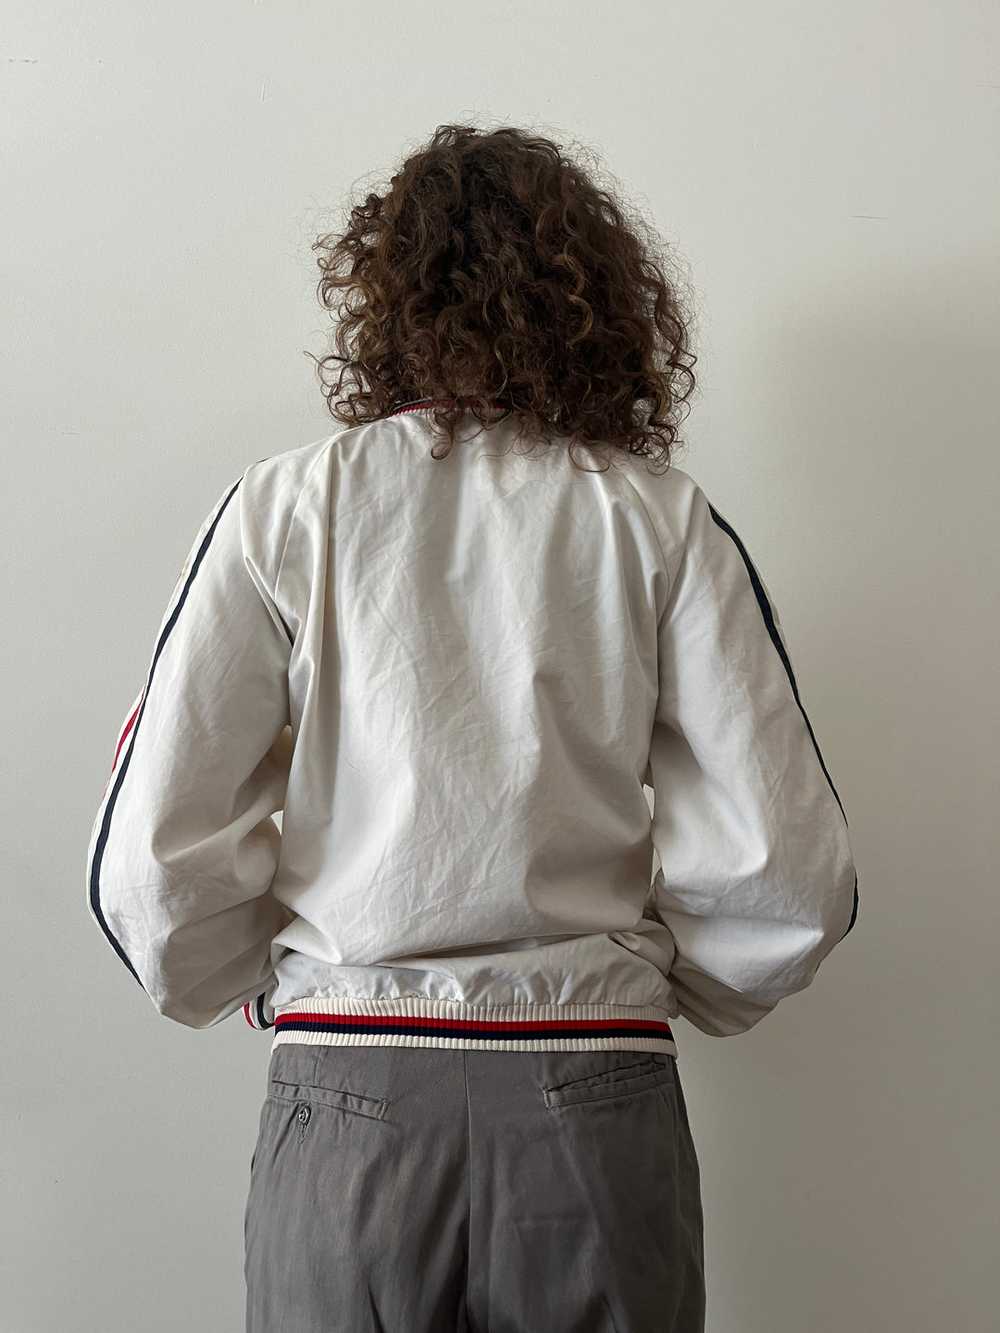 70s Fred Perry Tennis Jacket - image 6